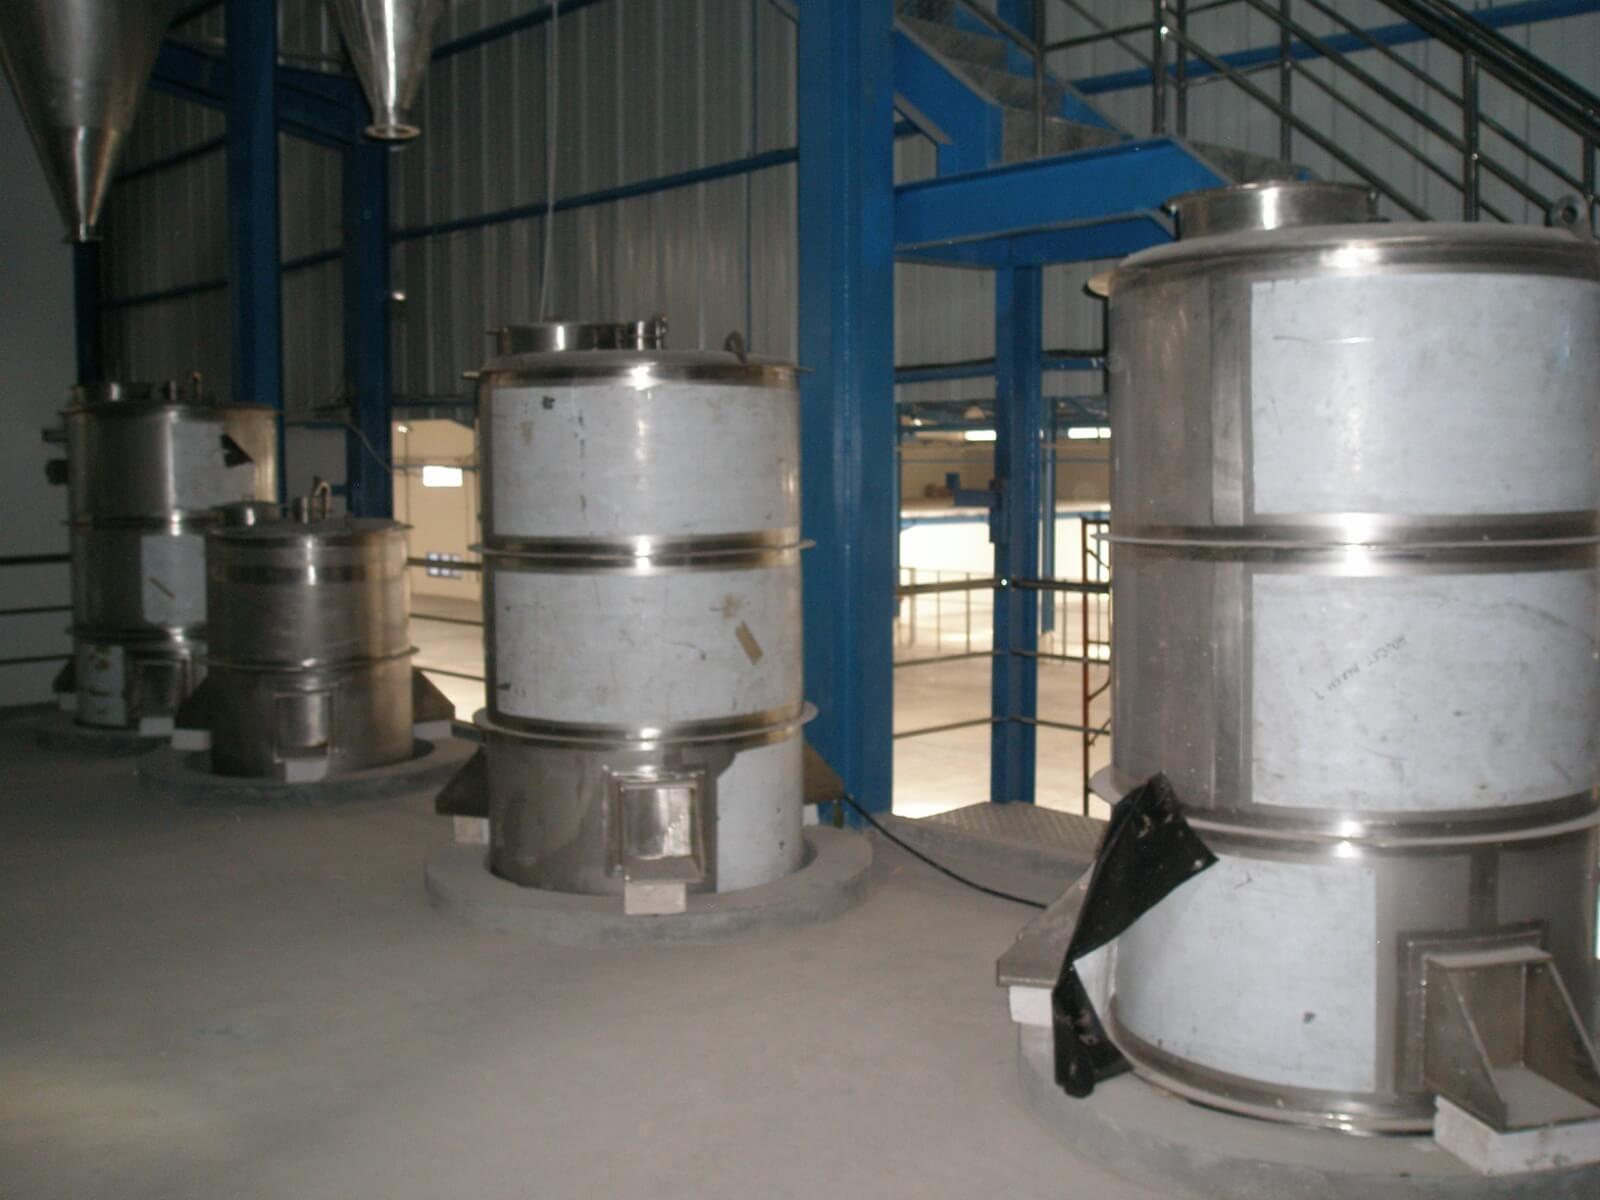 Cylo's Tanks Weighting System On-site Under Installation